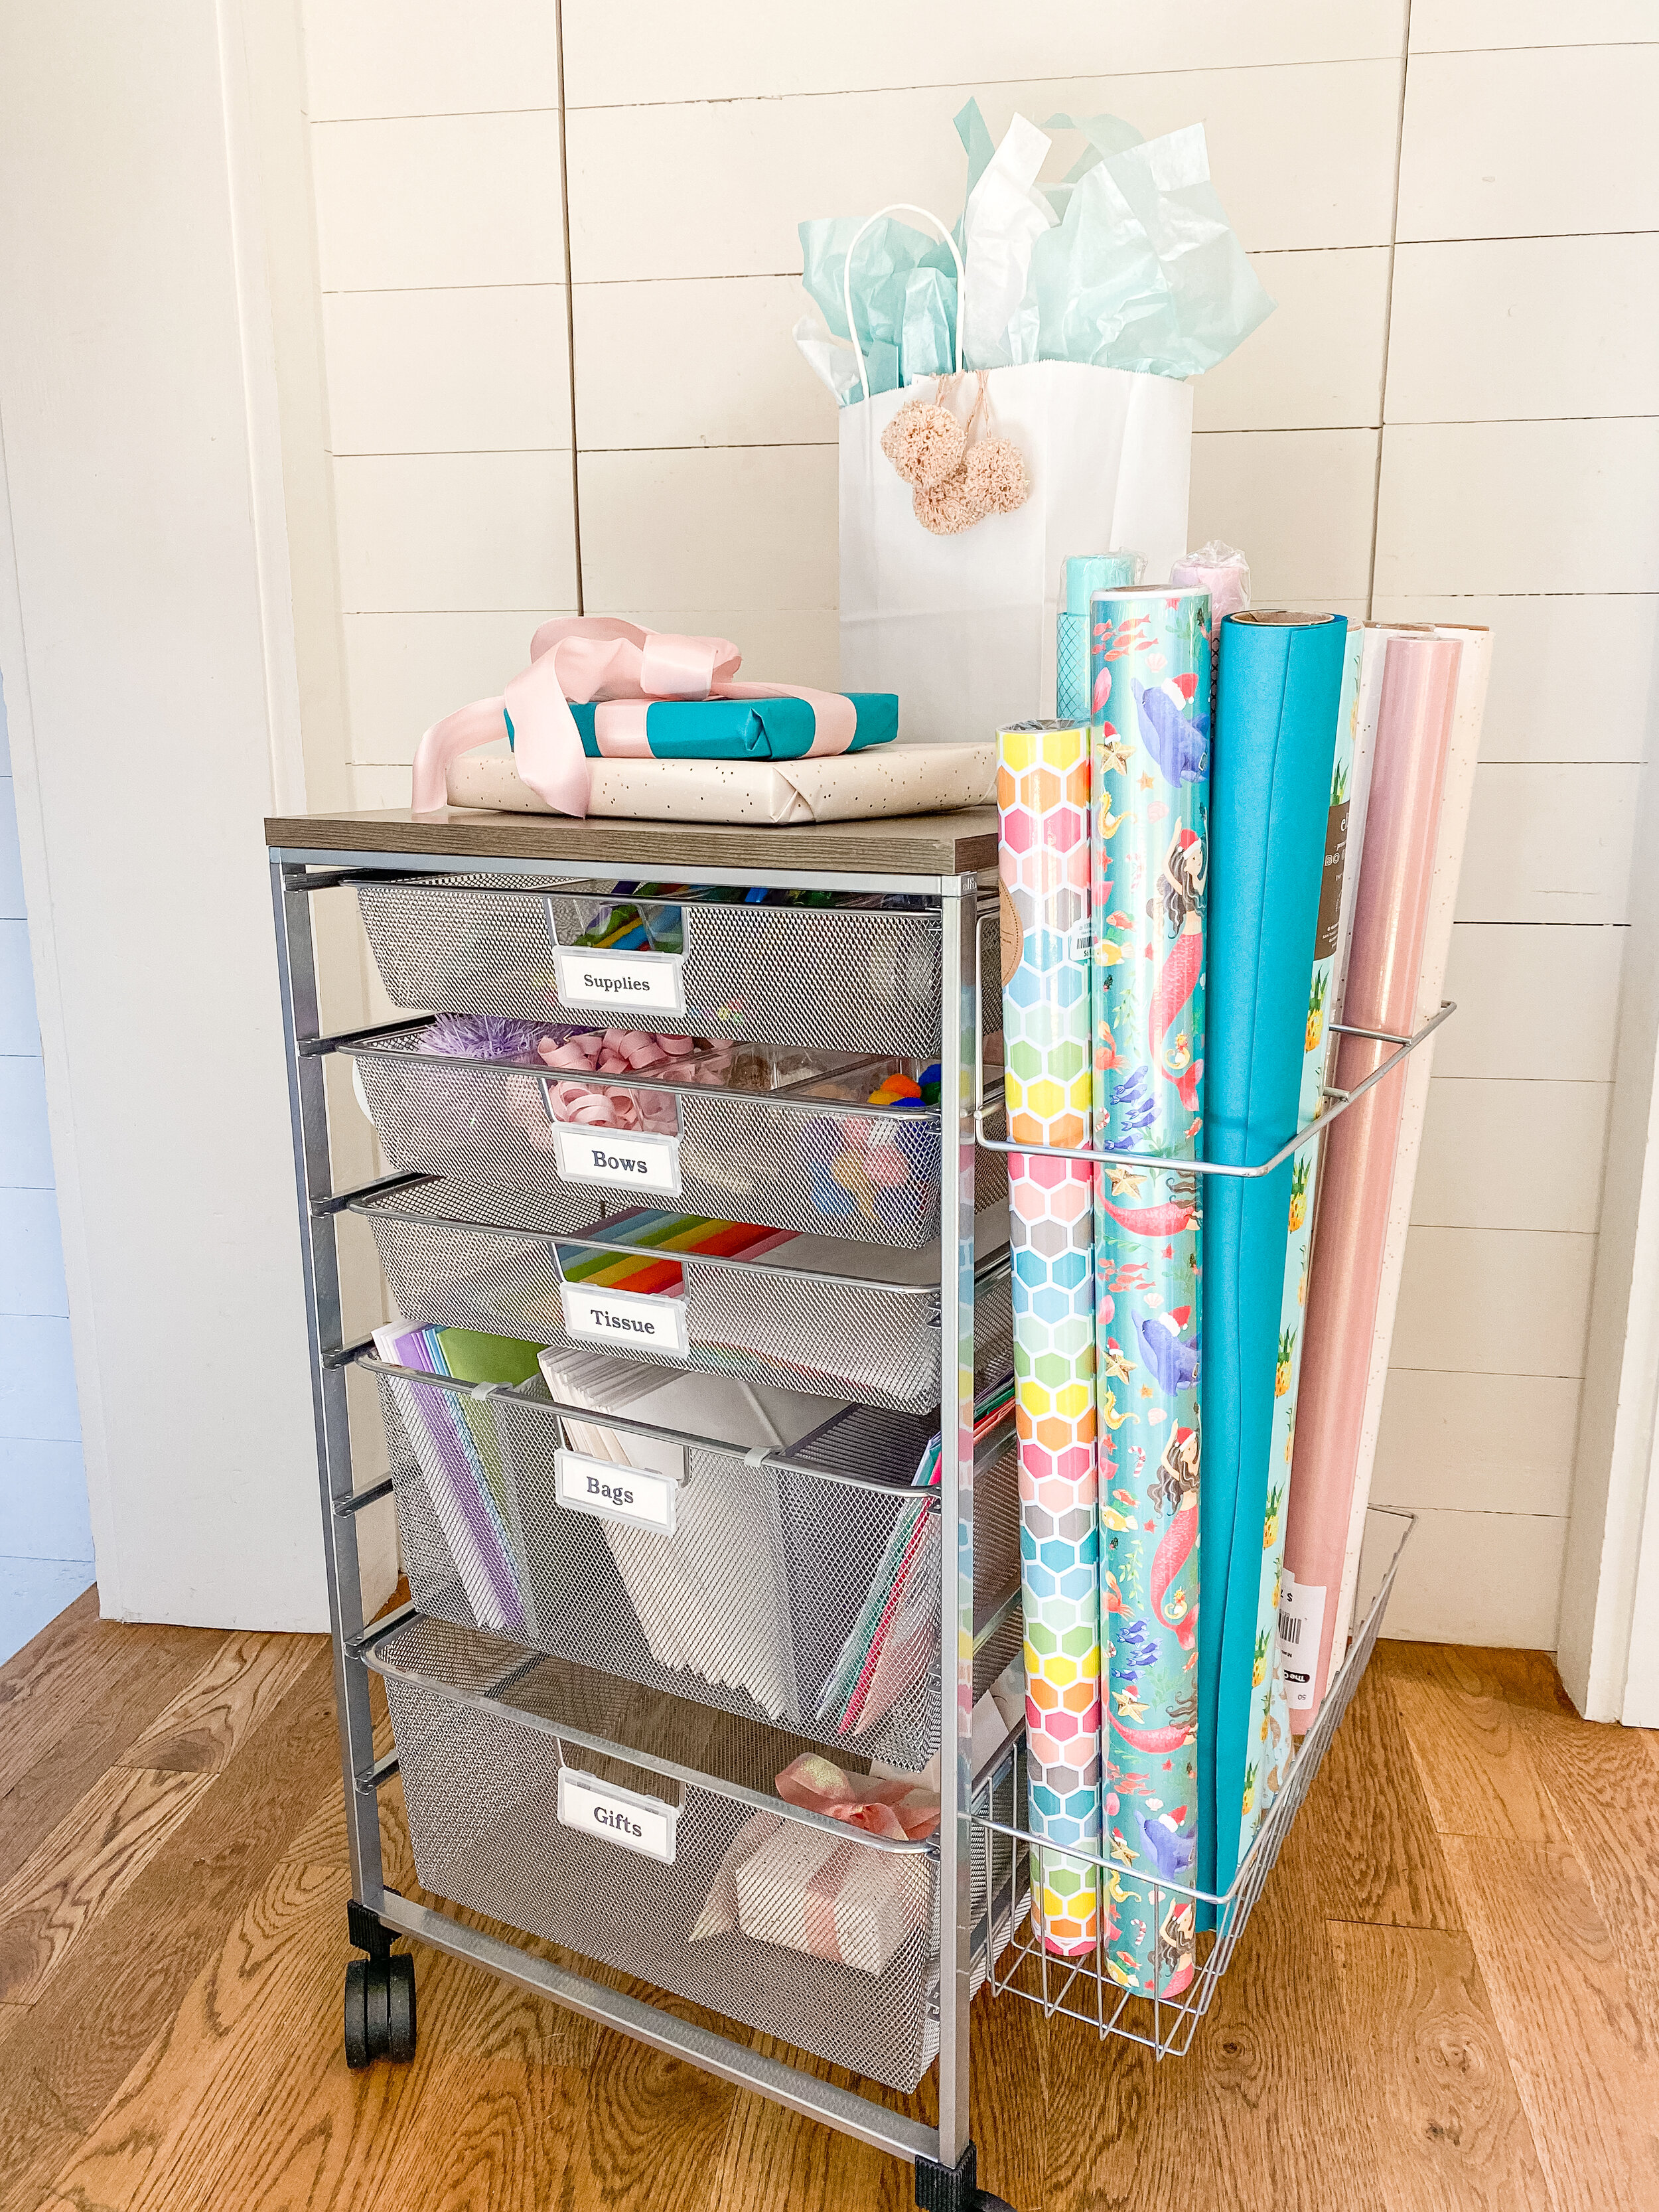 5 Simple Ways To Organize Your Wrapping Supplies — Blue Pencil Home